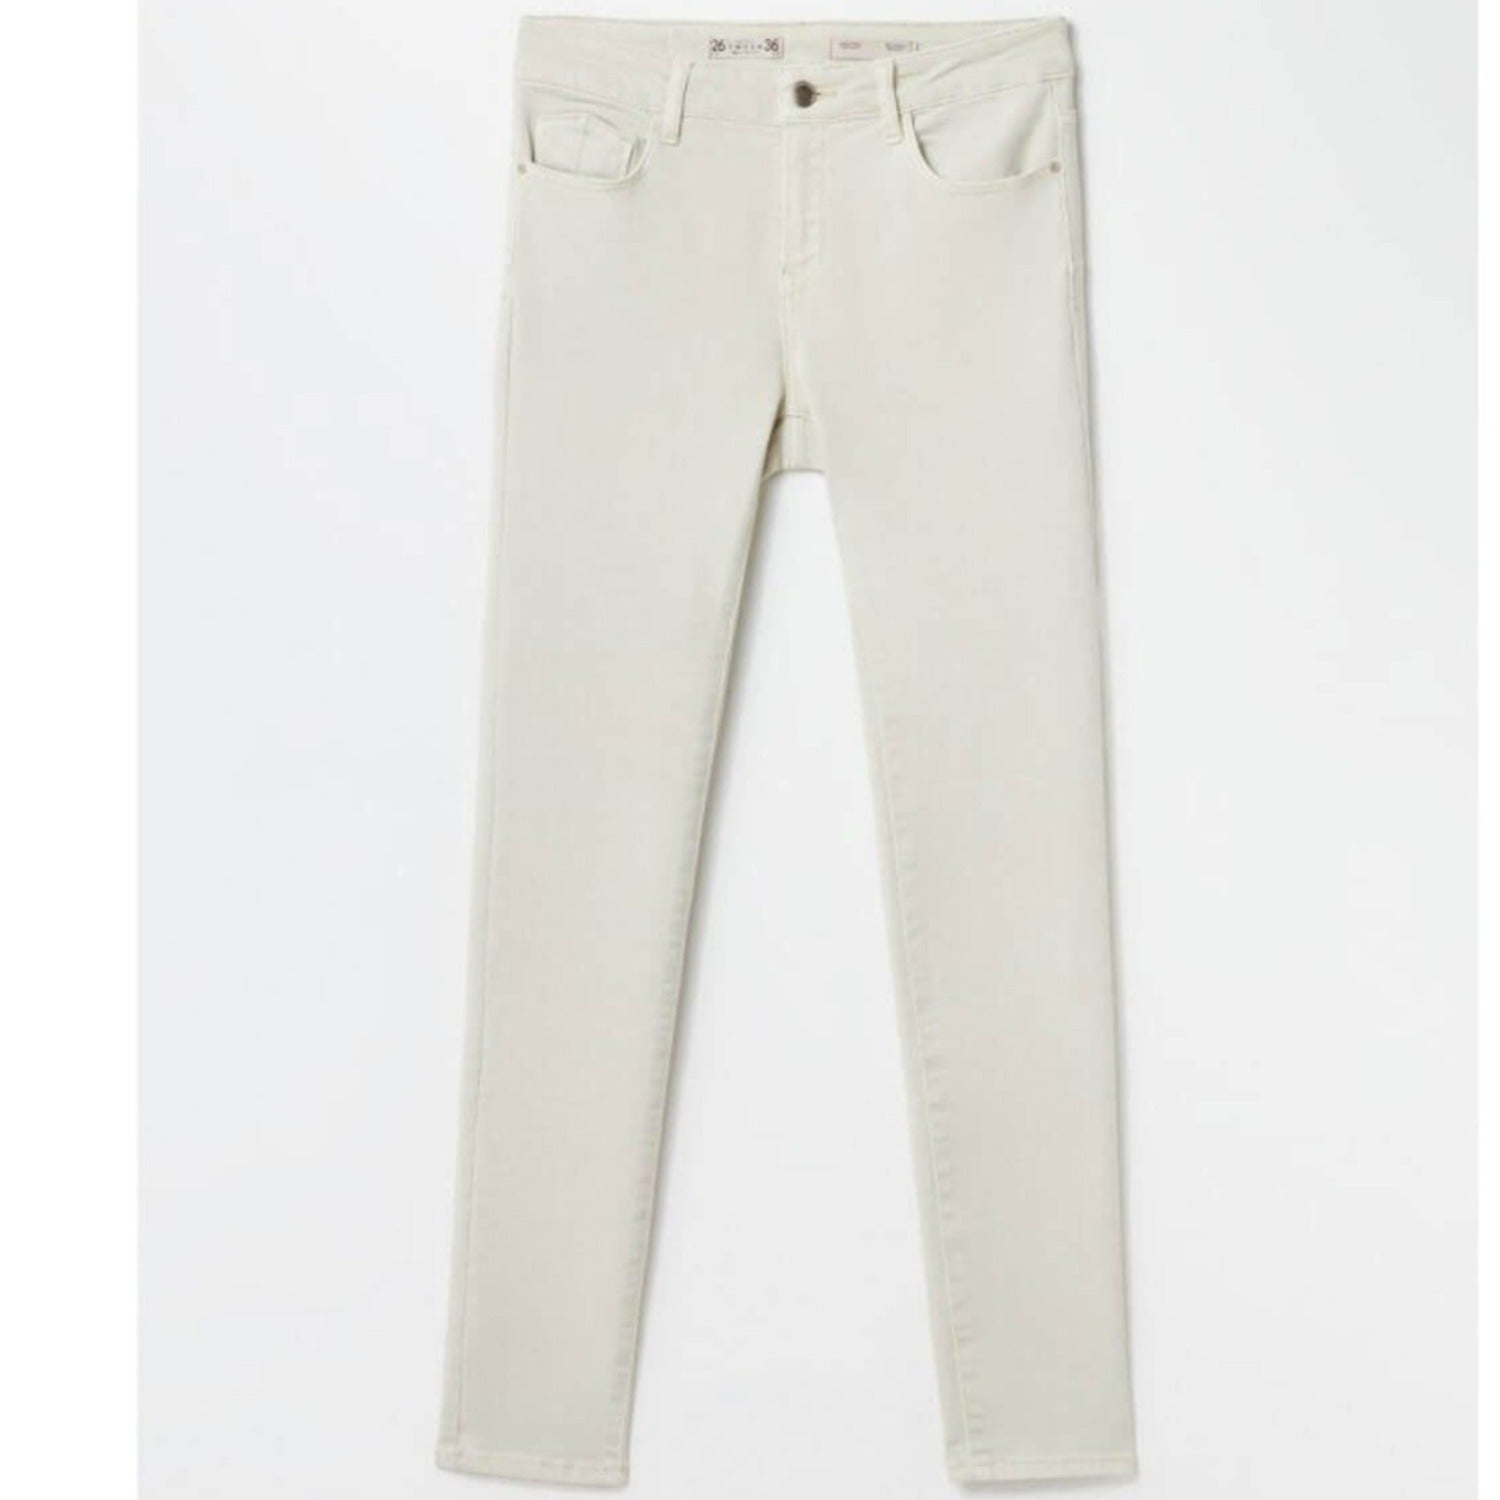 Sfera Push-Up Jeans - Stone 1 Shaws Department Stores